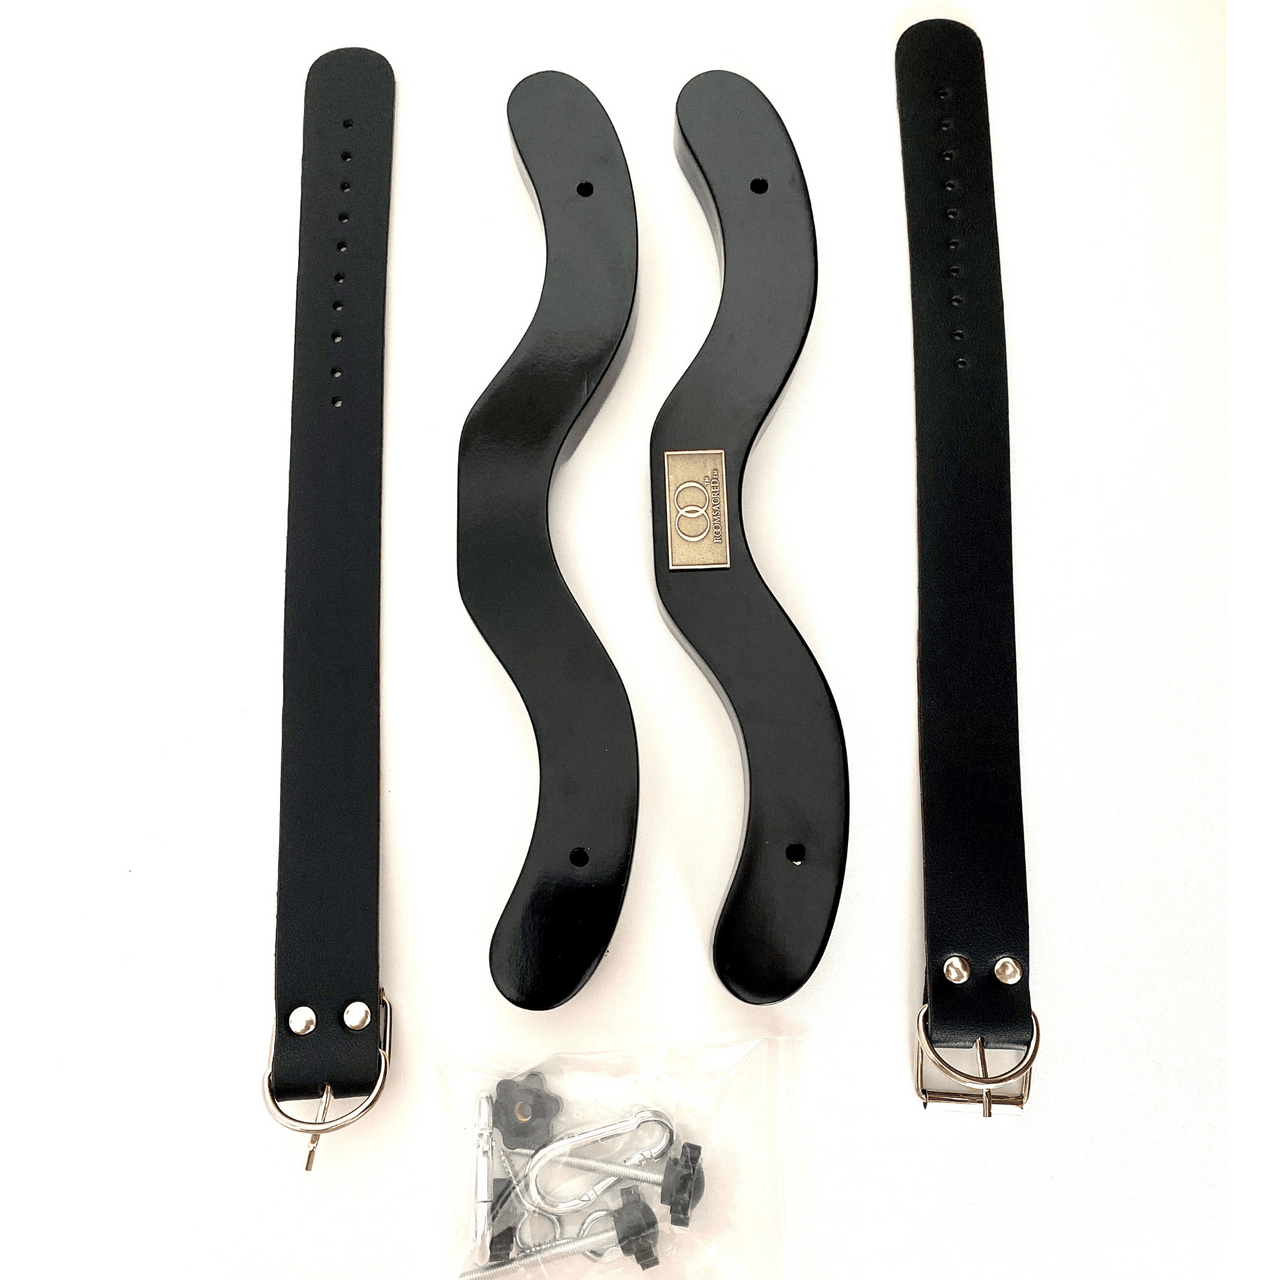 Black Wooden Humbler with Secure and Adjustable PU Leather Ankle Cuffs Control for BDSM Bondage Play